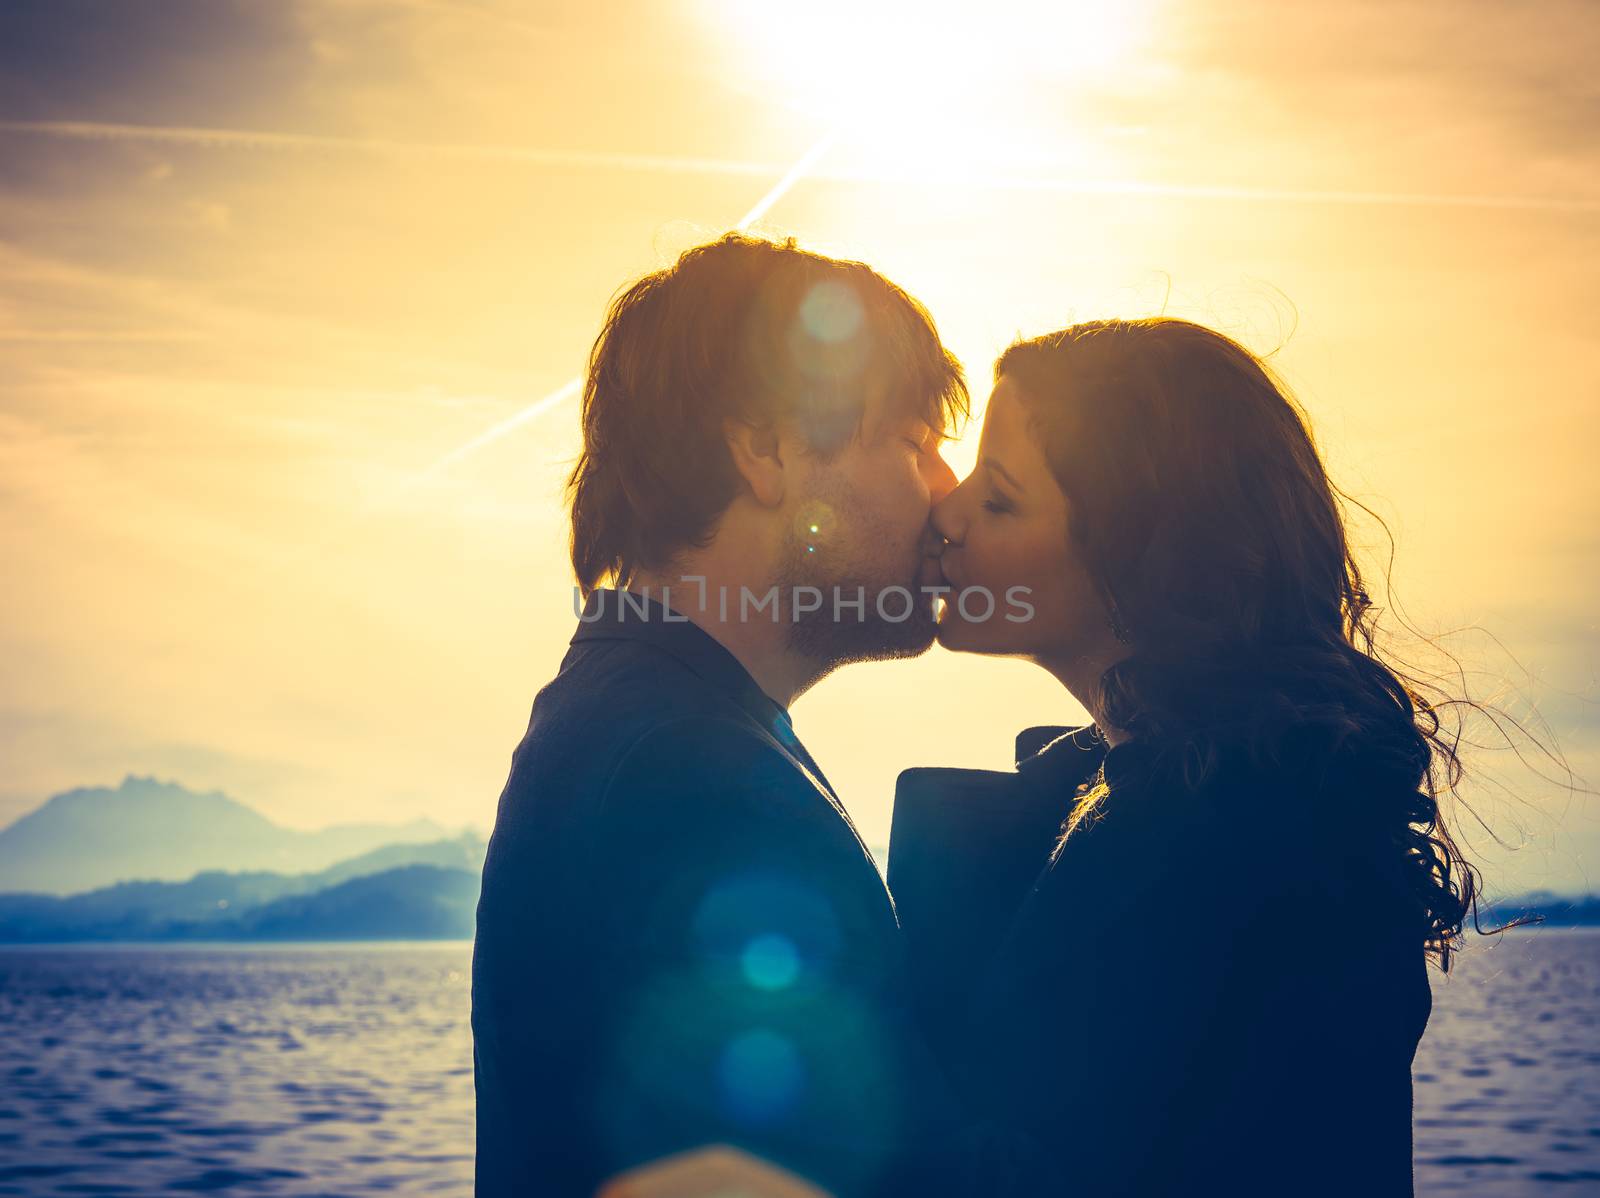 Photo of young adults by the water hugging and kissing in the late afternoon as the sun lowers in the sky. Heavily filtered for more romantic effect. Real lens flare visible.